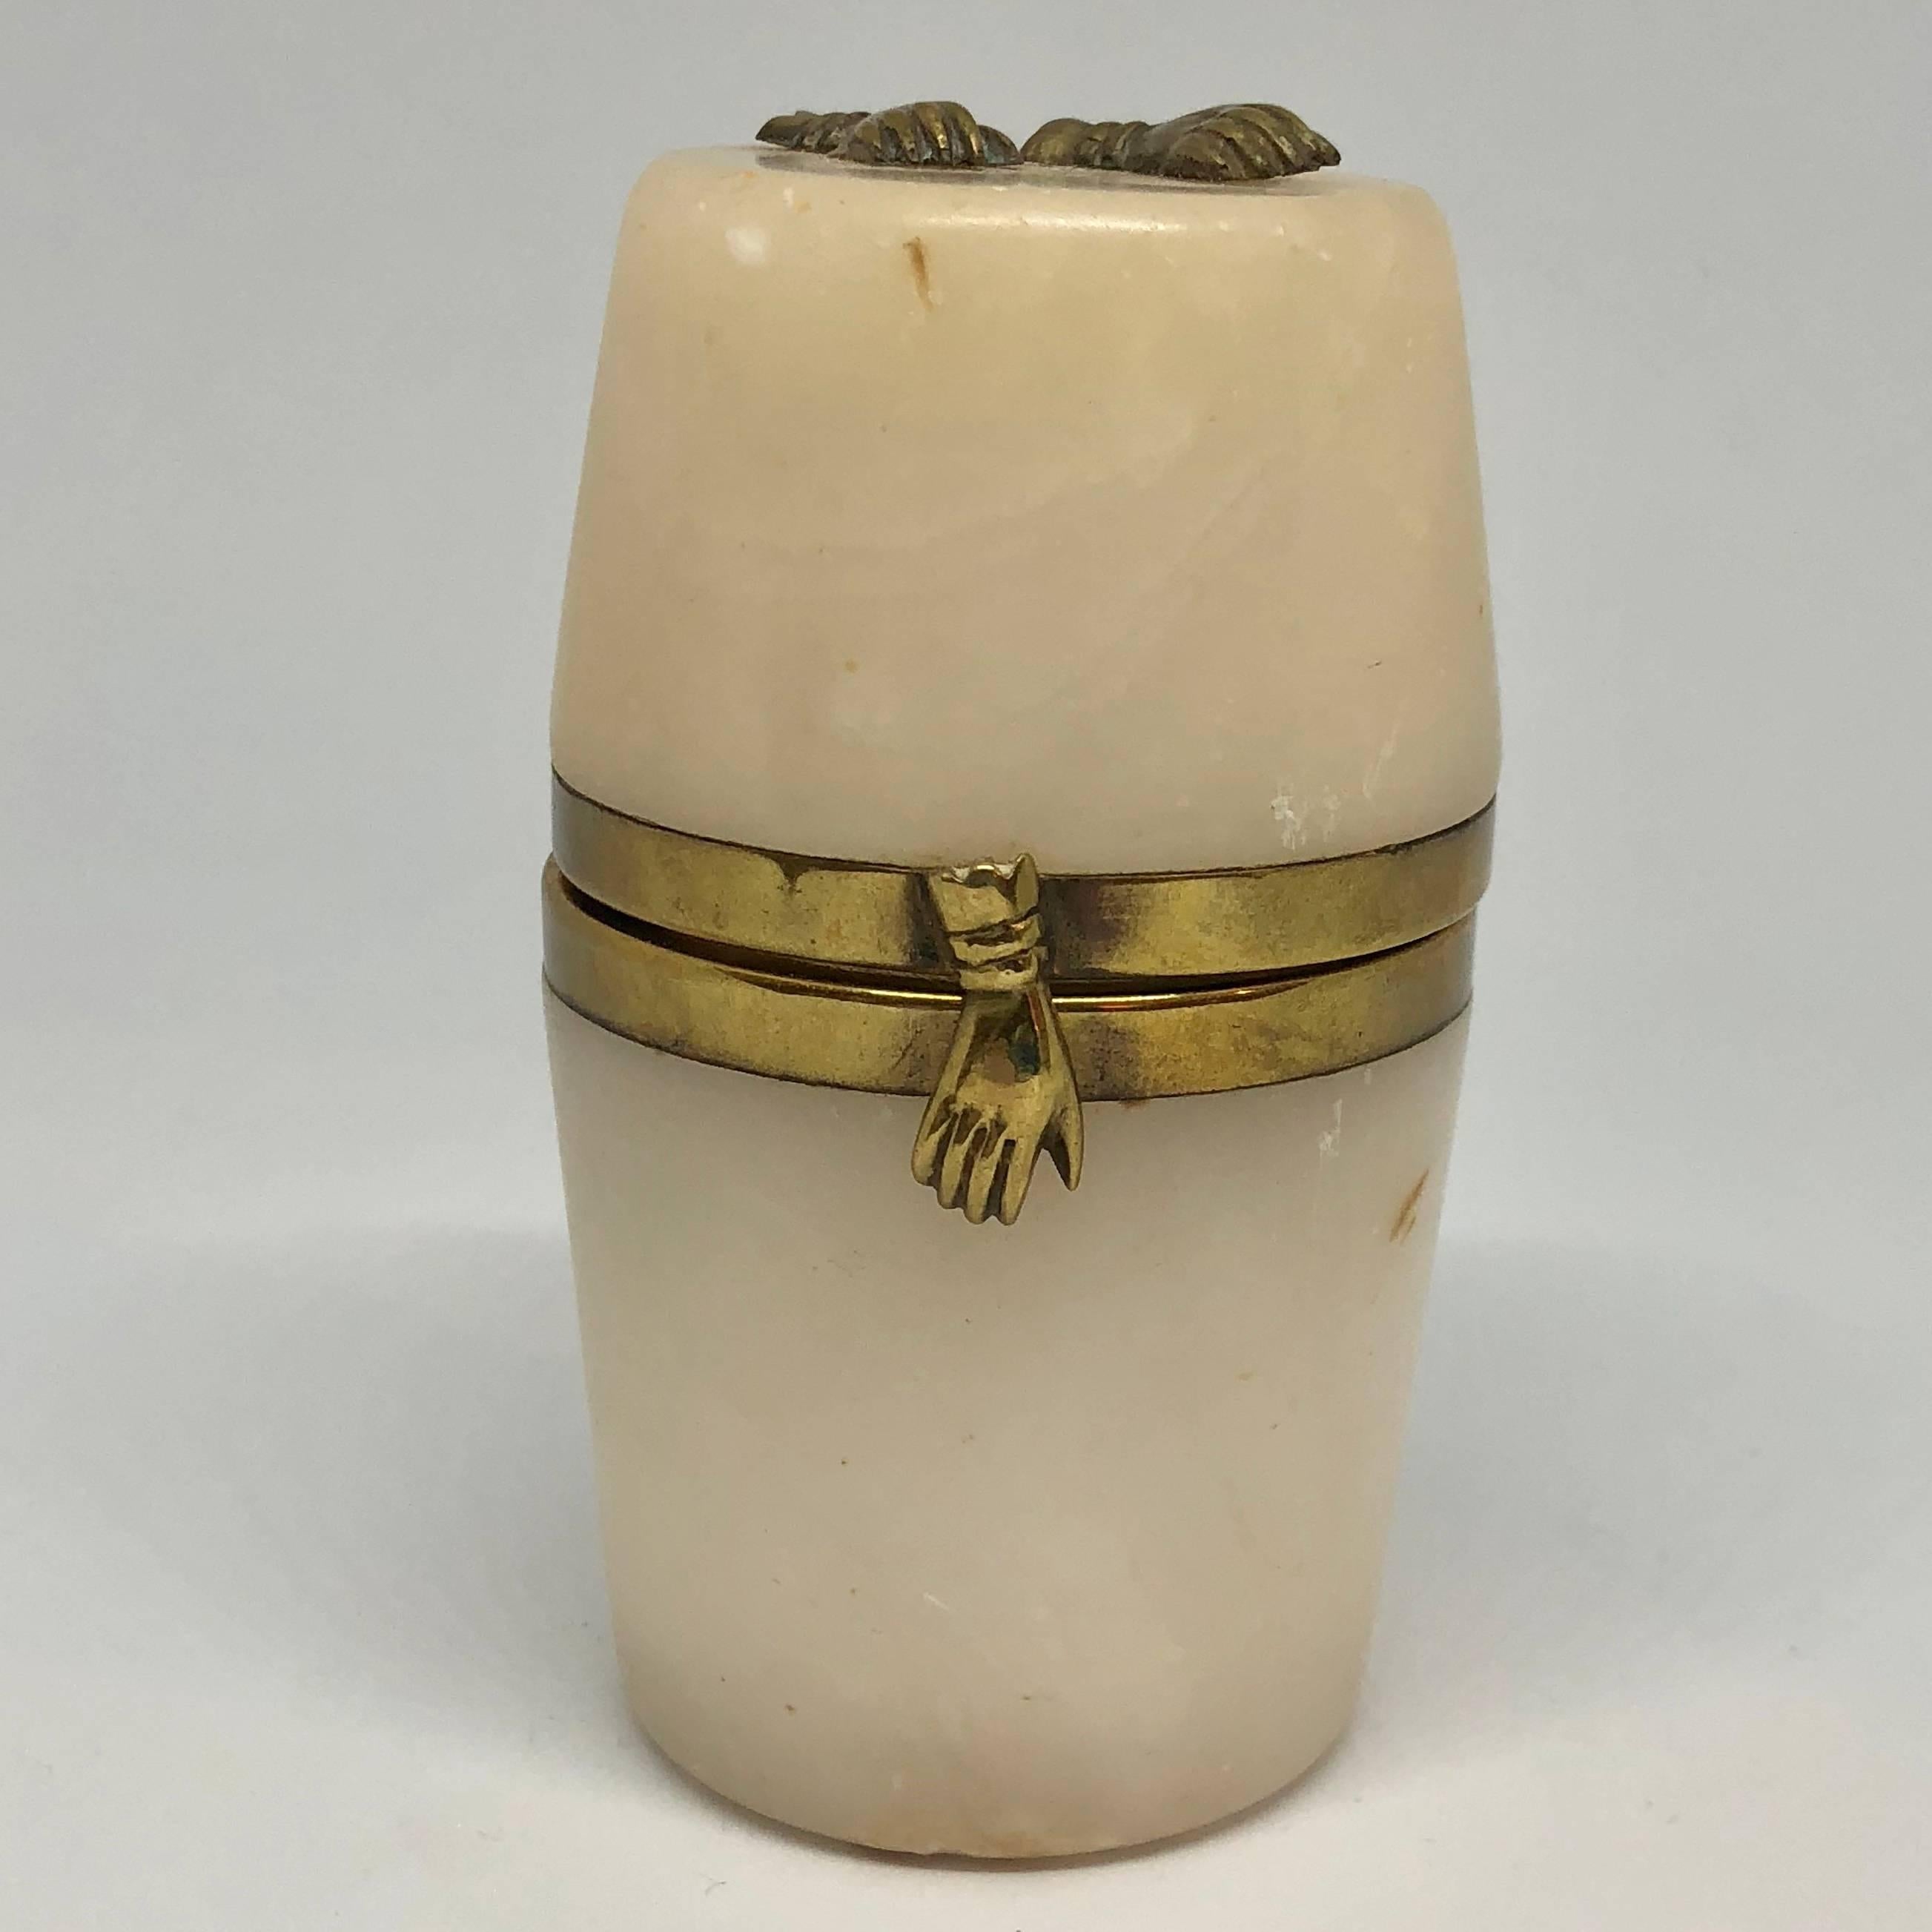 Small 18th century Alabaster barrel shaped jewelry box with brass hands décor.